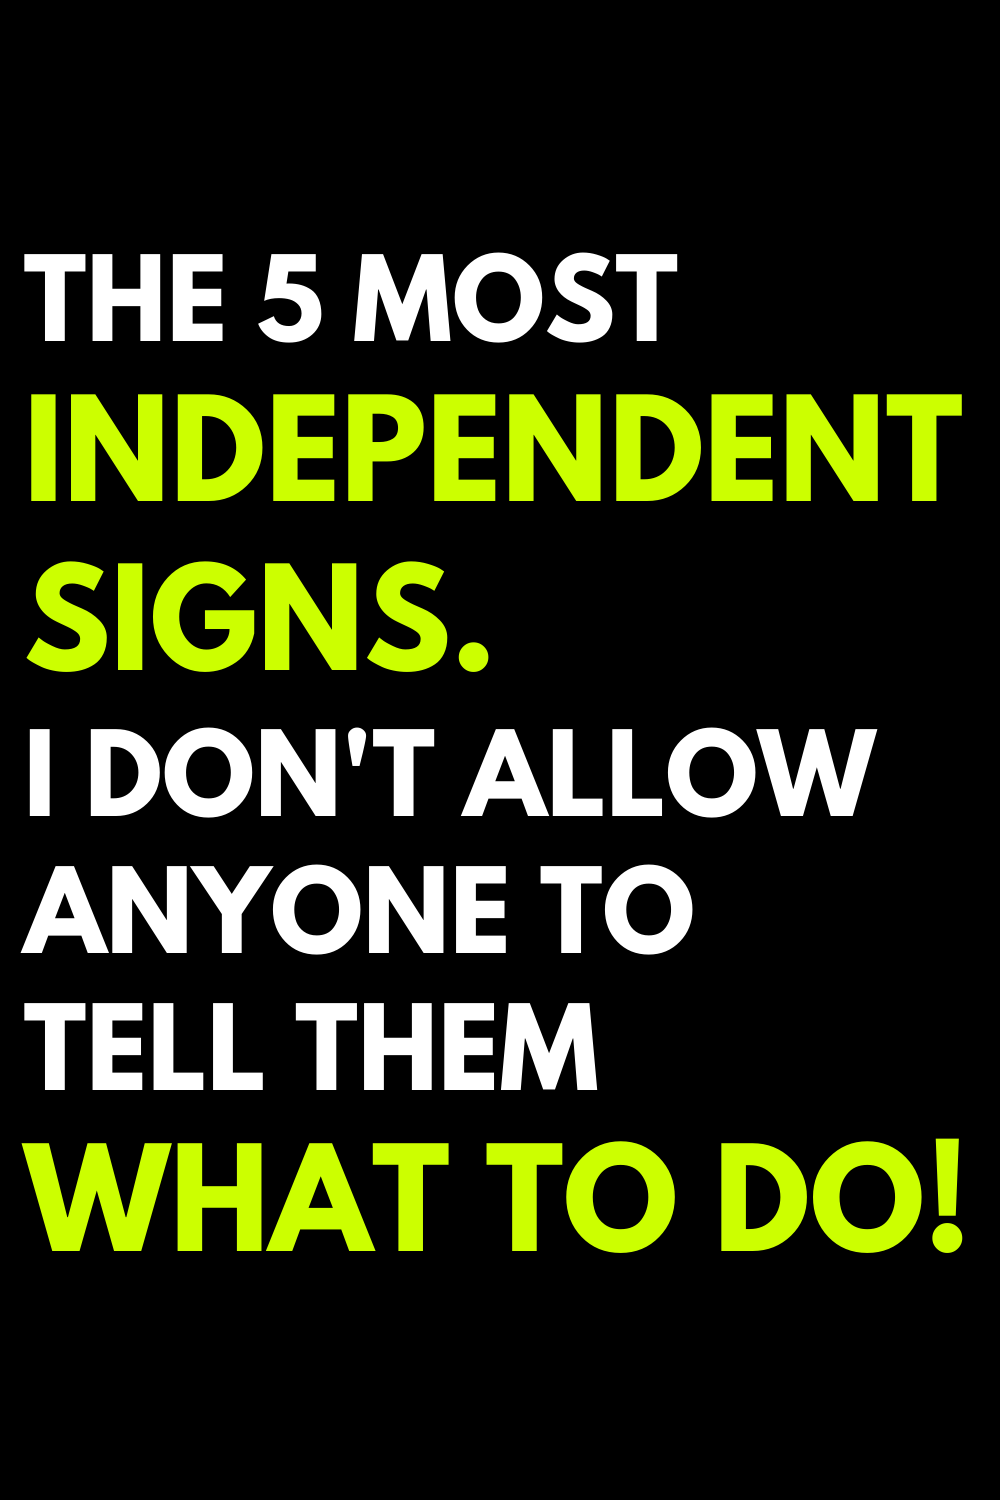 The 5 most independent signs. I don't allow anyone to tell them what to do!